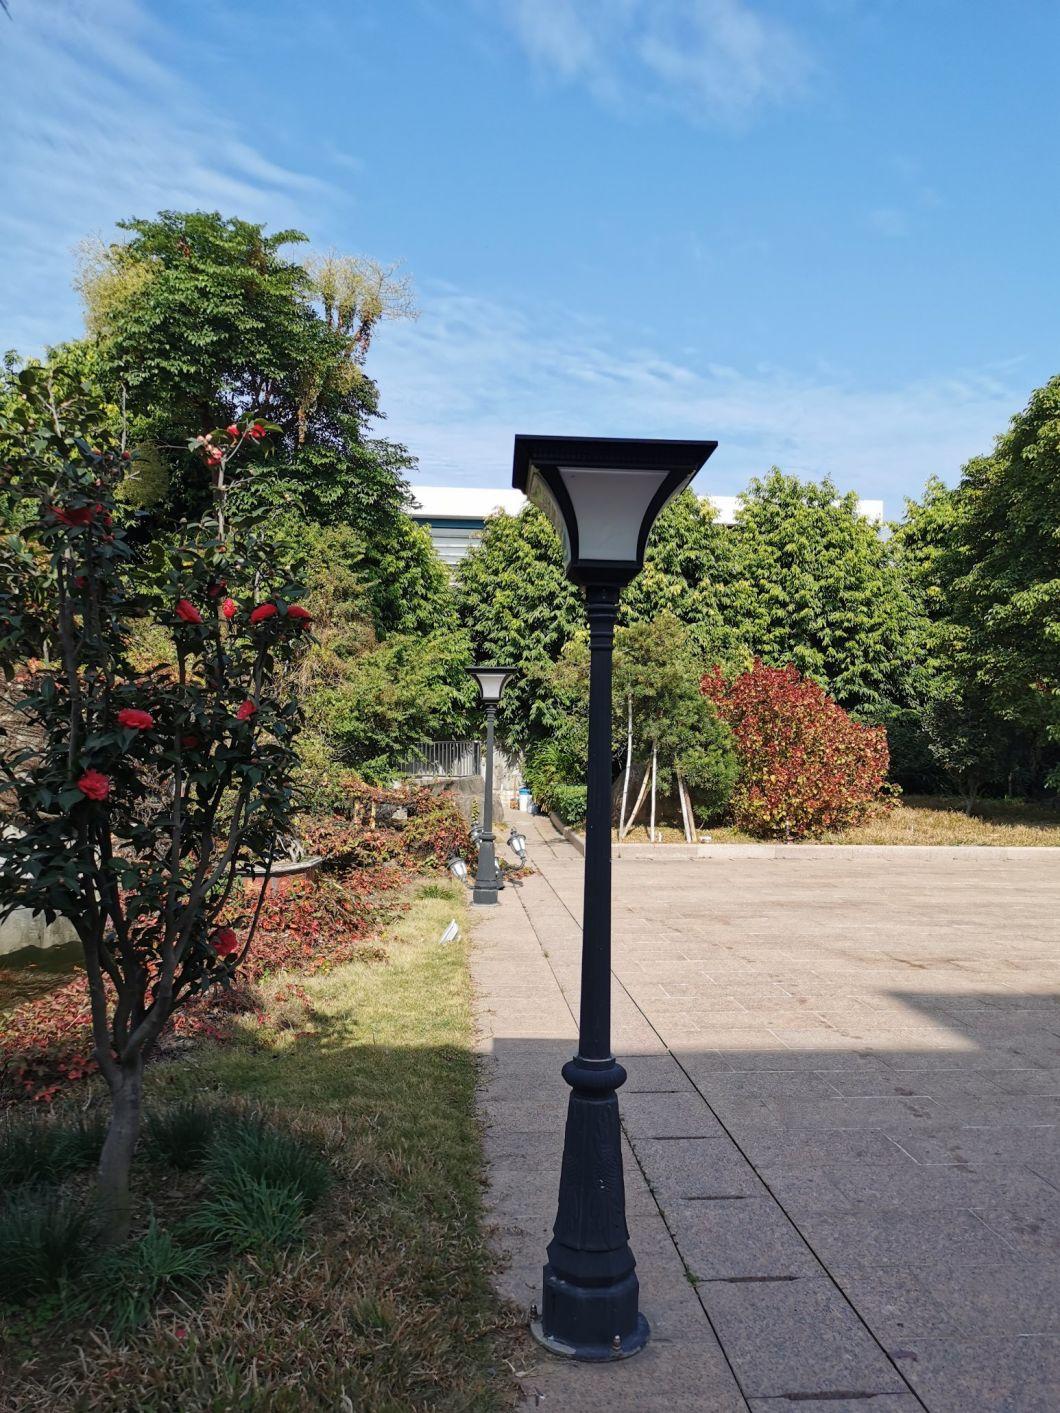 Factory Supplier Outdoor LED Landscape Light for Lawn Patio Pathway Yard Walkway Full High Power Solar Sensor Warm White Solar Lights